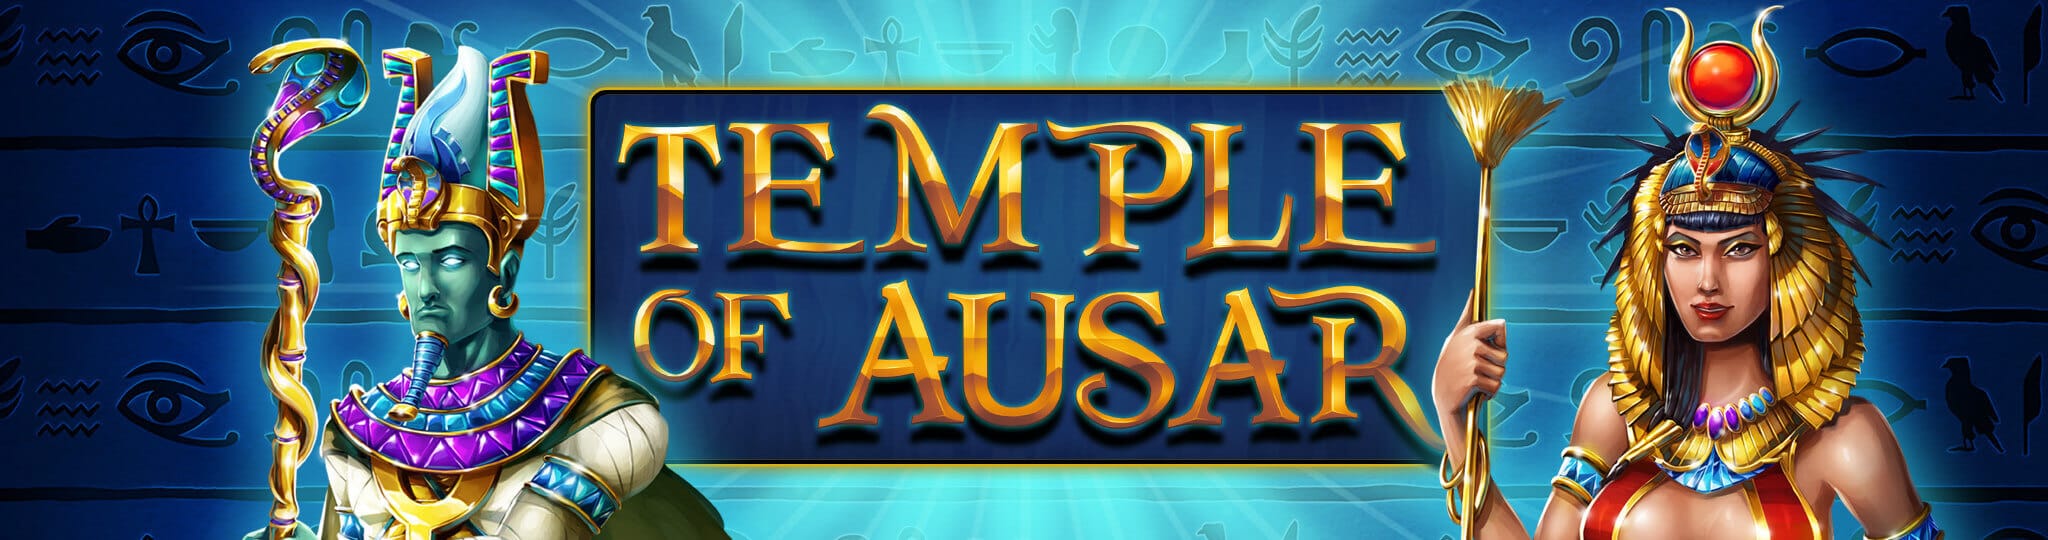 Temple of Ausar Review